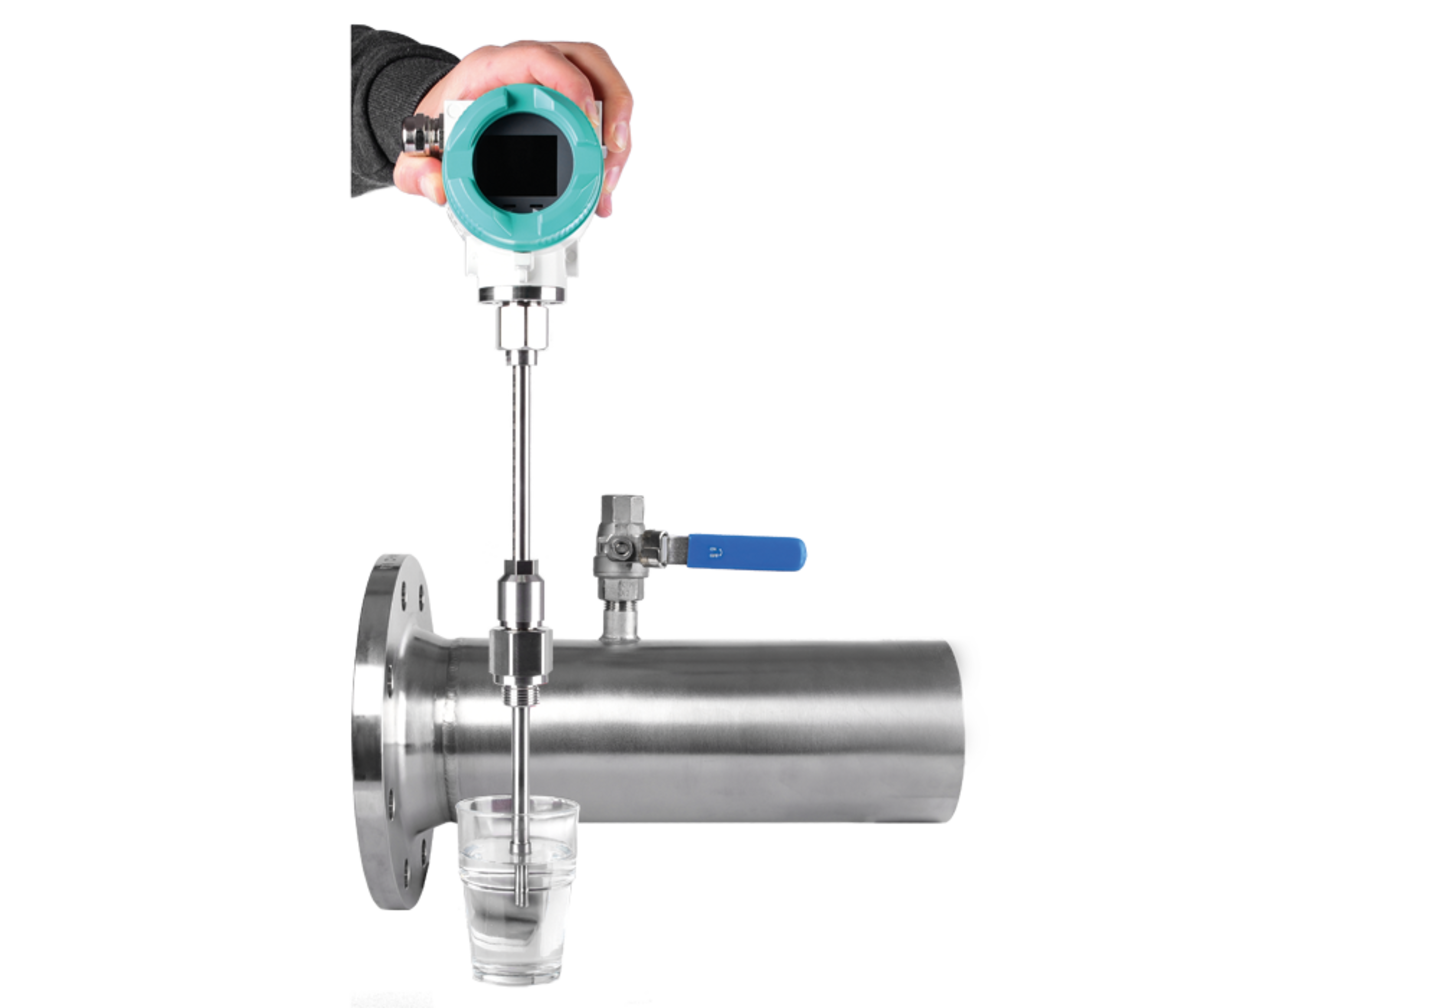 Uncomplicated cleaning of the VA 550 flow meter